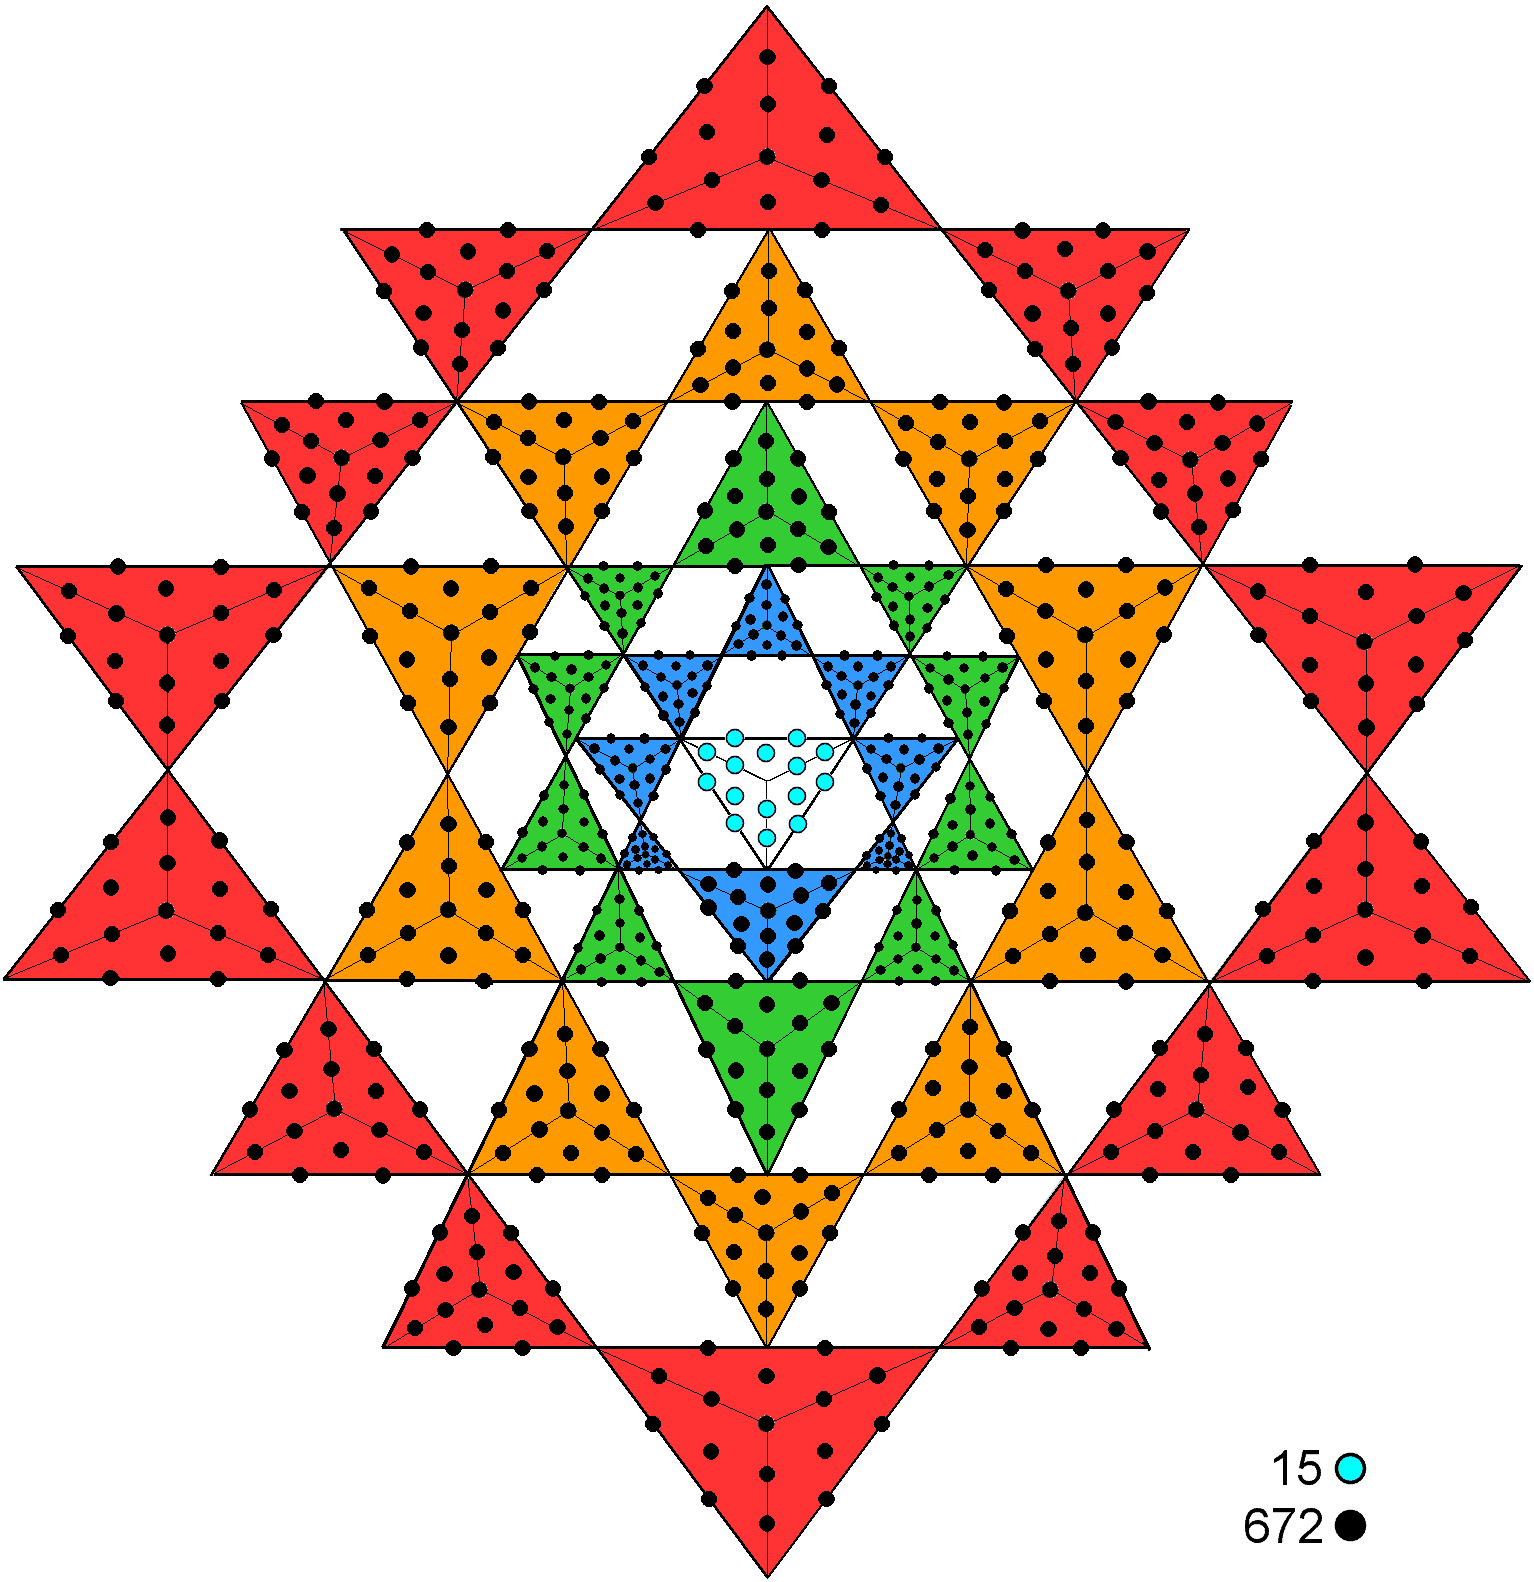 (15+672) yods surround centre of the 3-d Sri Yantra